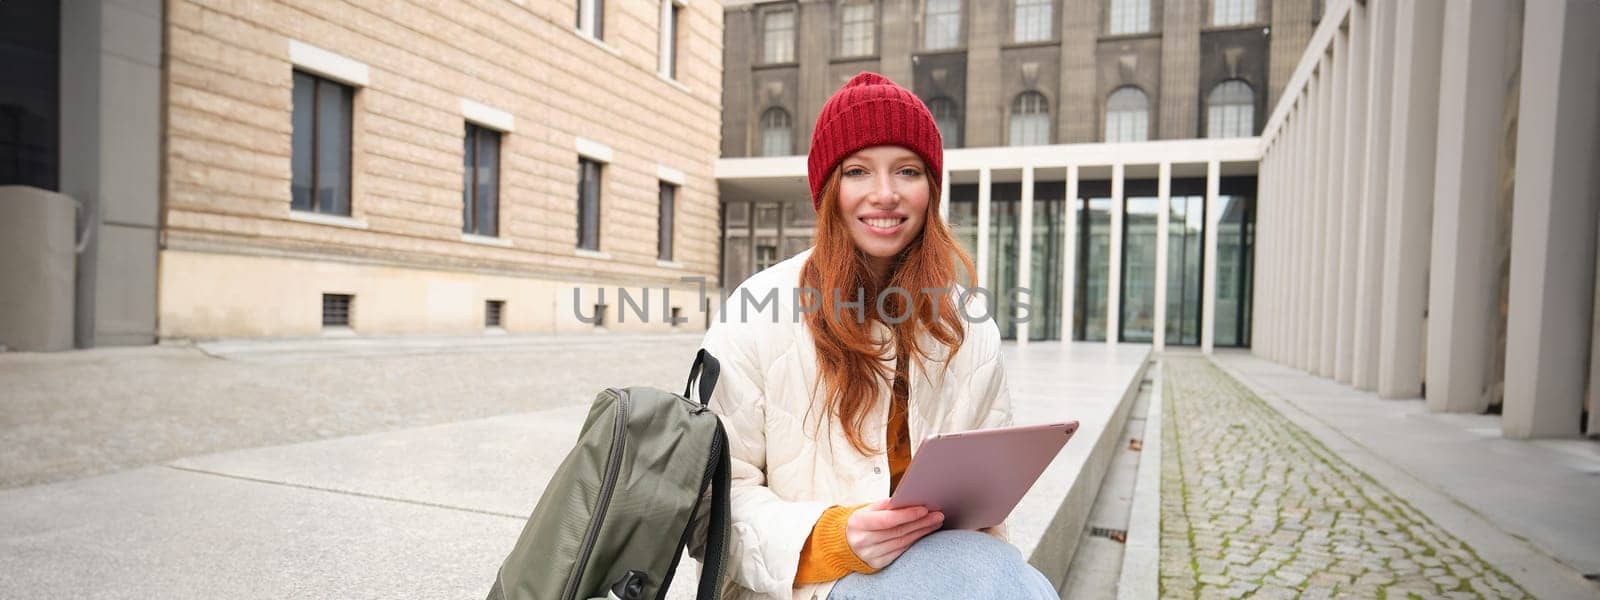 Beautiful redhead woman in red hat, sits with backpack and thermos, using digital tablet outdoors, connects to wifi, texts message, books tickets online.